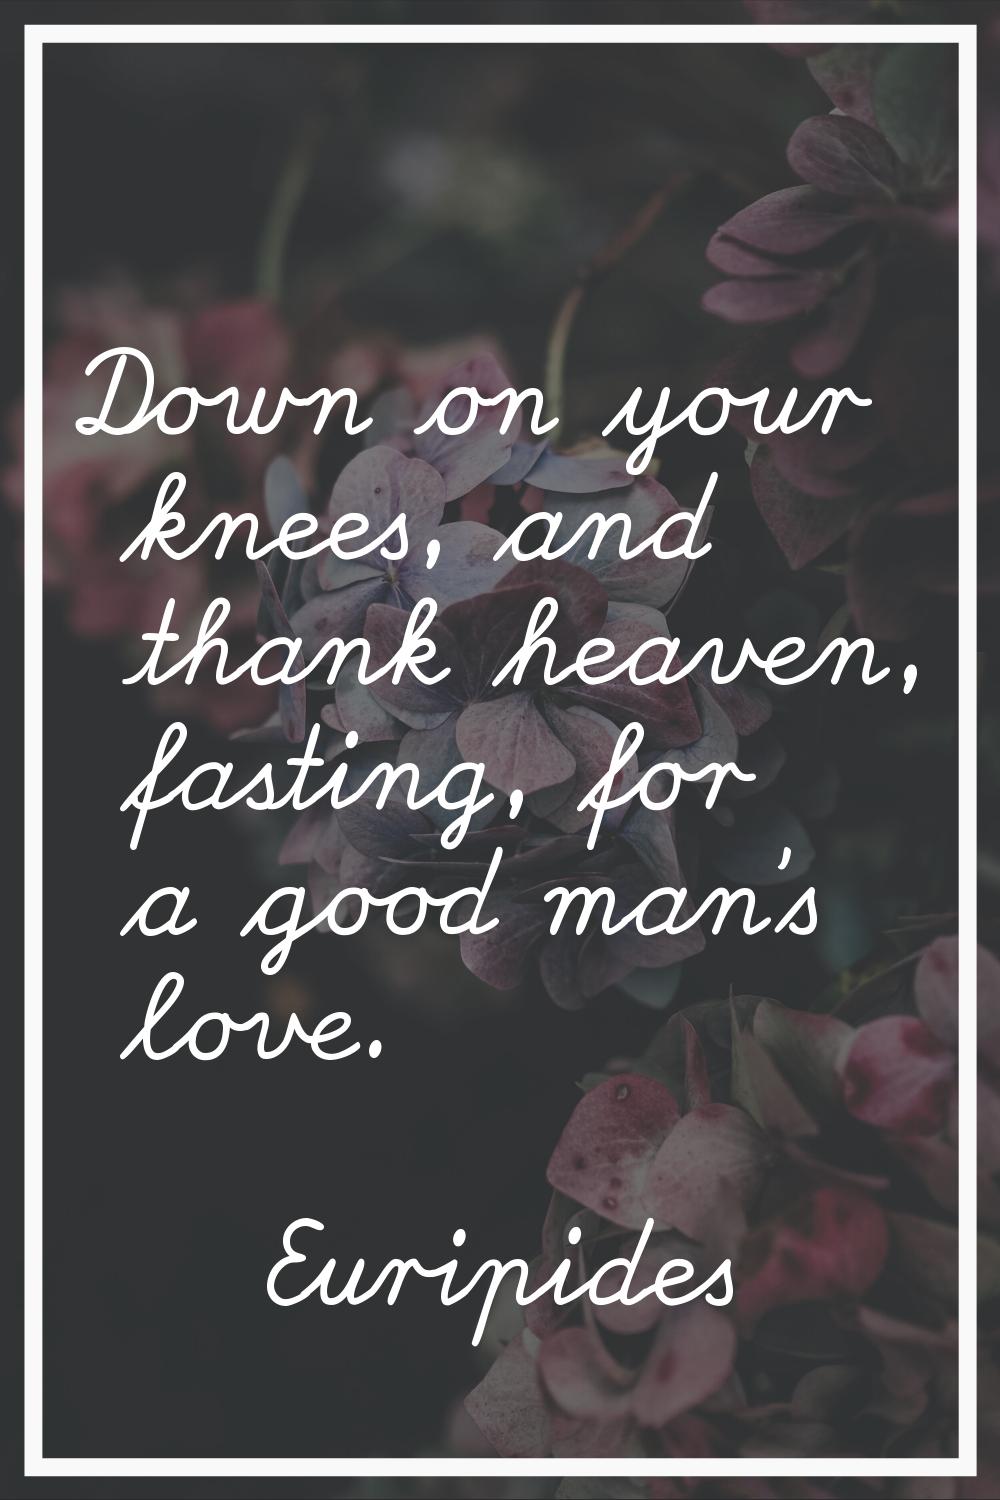 Down on your knees, and thank heaven, fasting, for a good man's love.